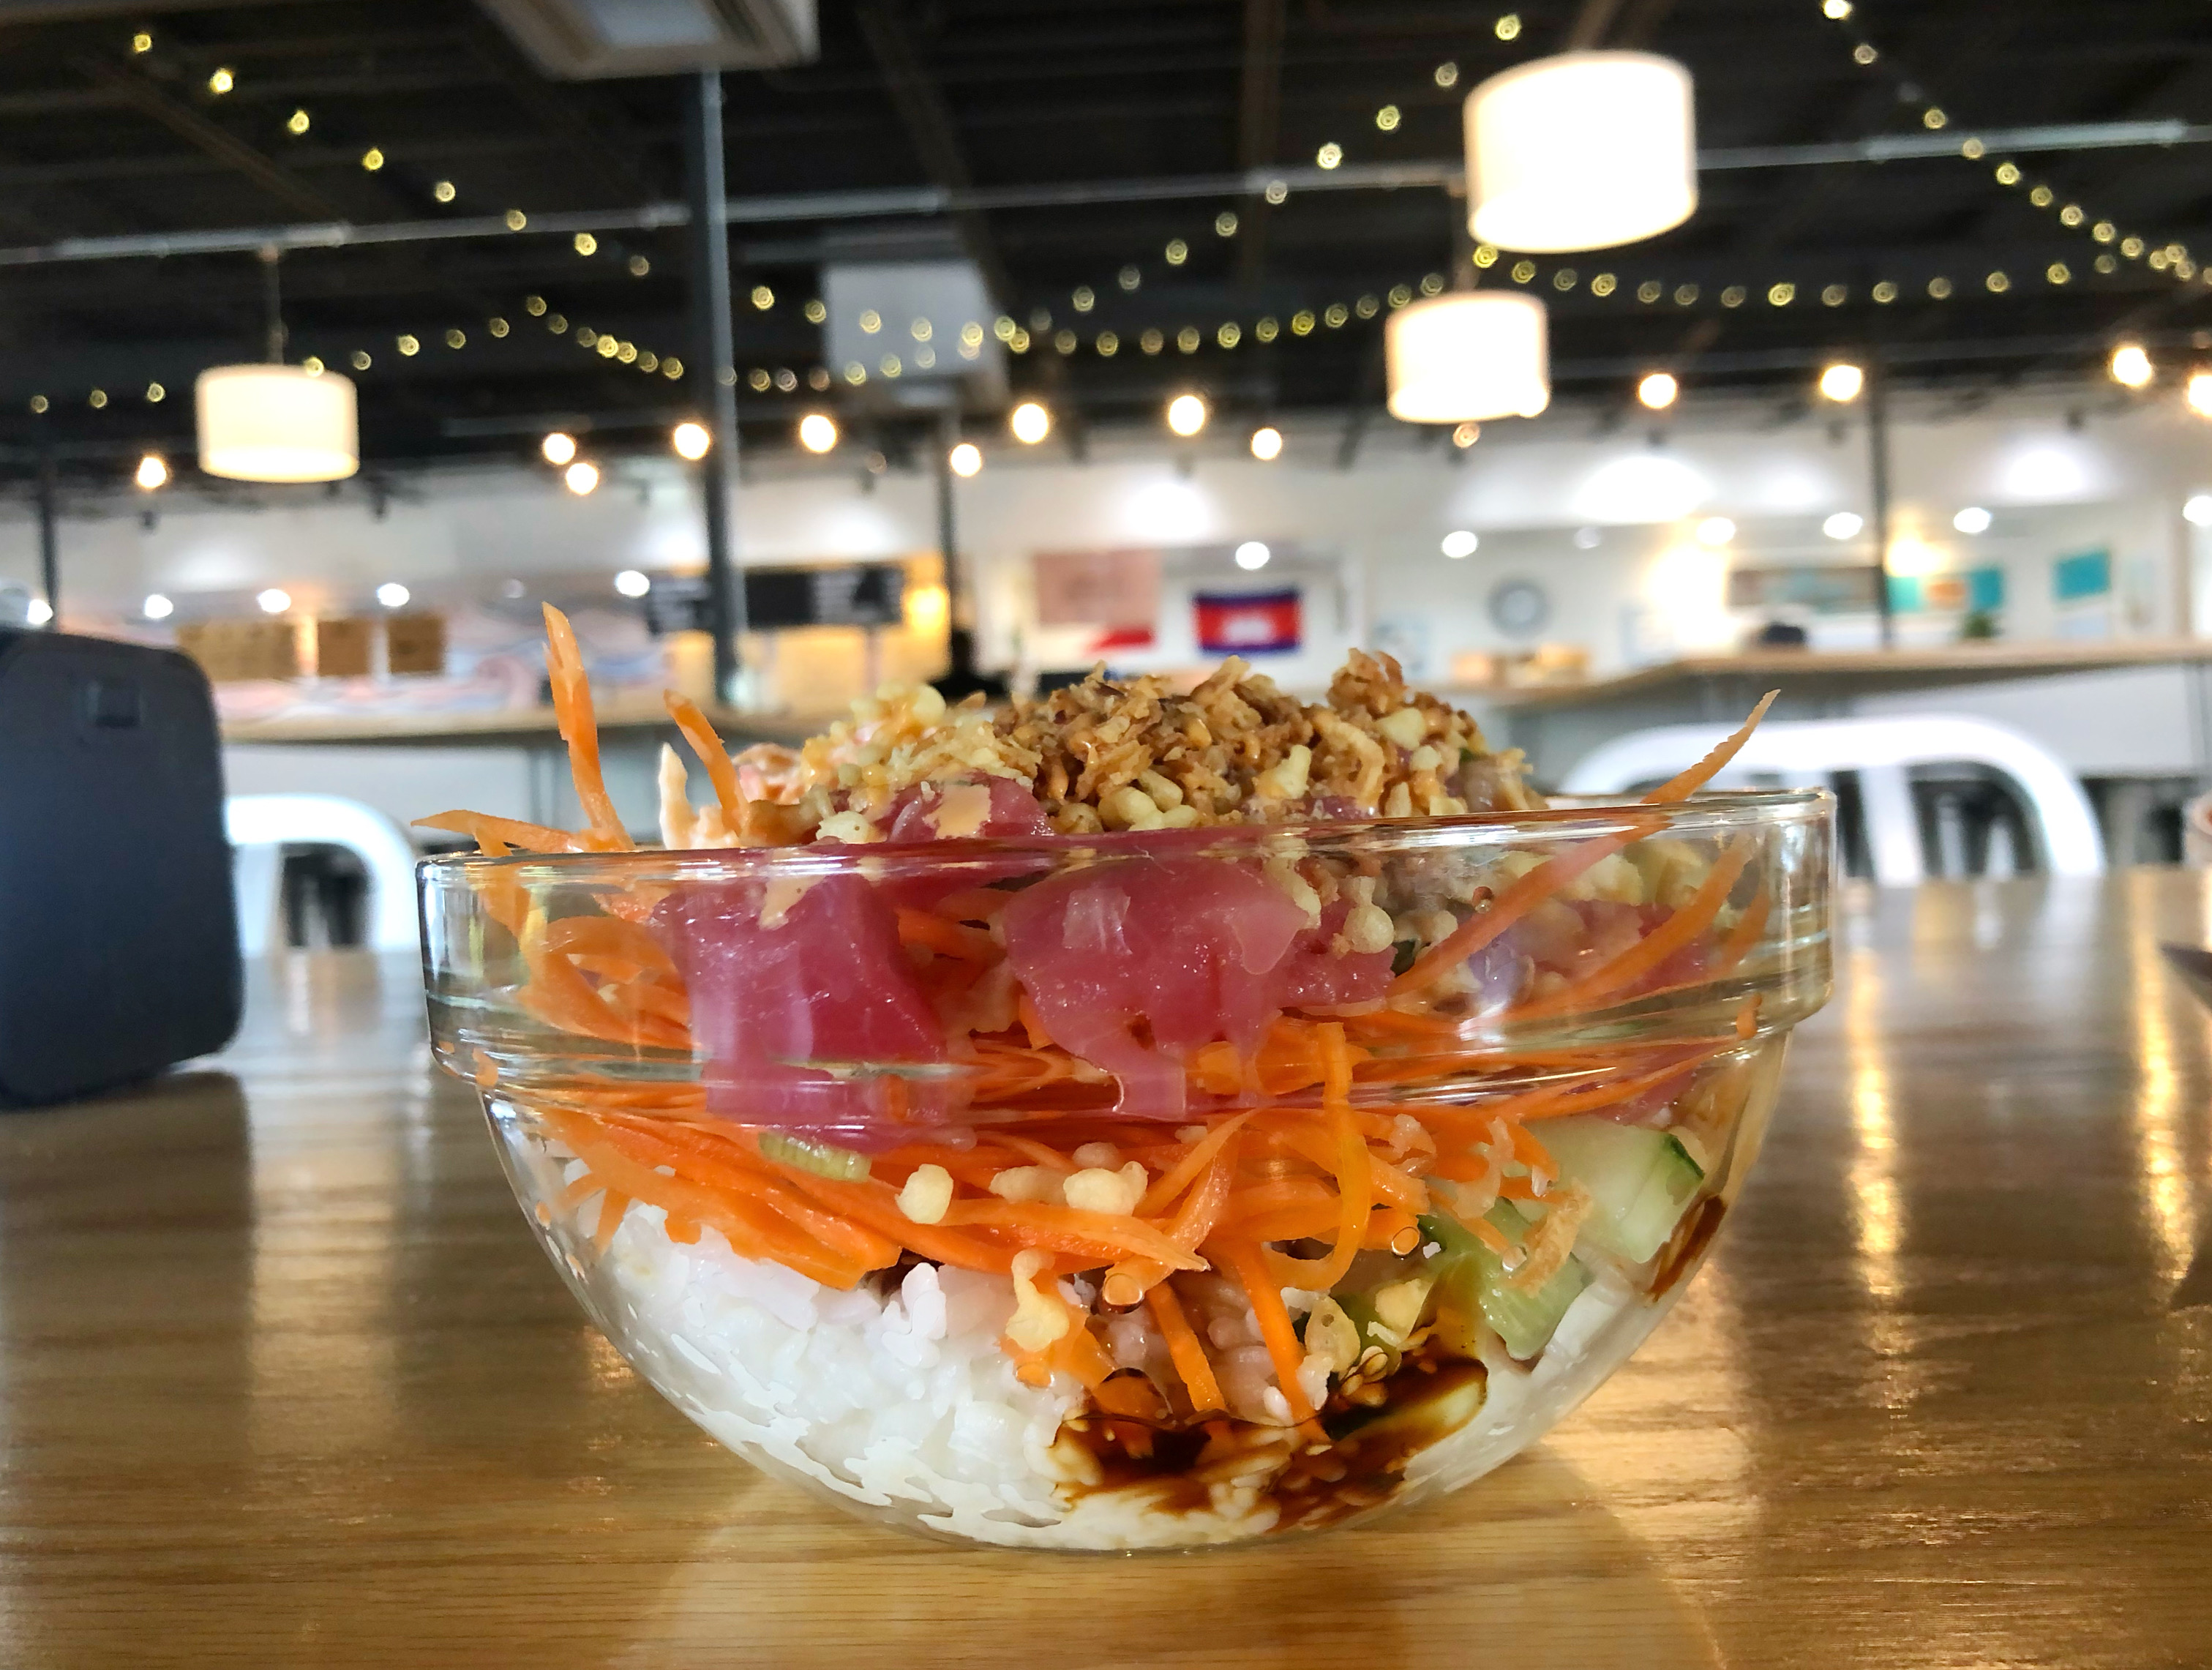 On a warm wooden table, there is a glass bowl of tuna poke with dark sauce dripping down white rice and tempura crunch on top. In the background, there are blurred string lights and blurred flags and signs of Broadway Food Hall restaurants. Photo by Alyssa Buckley.